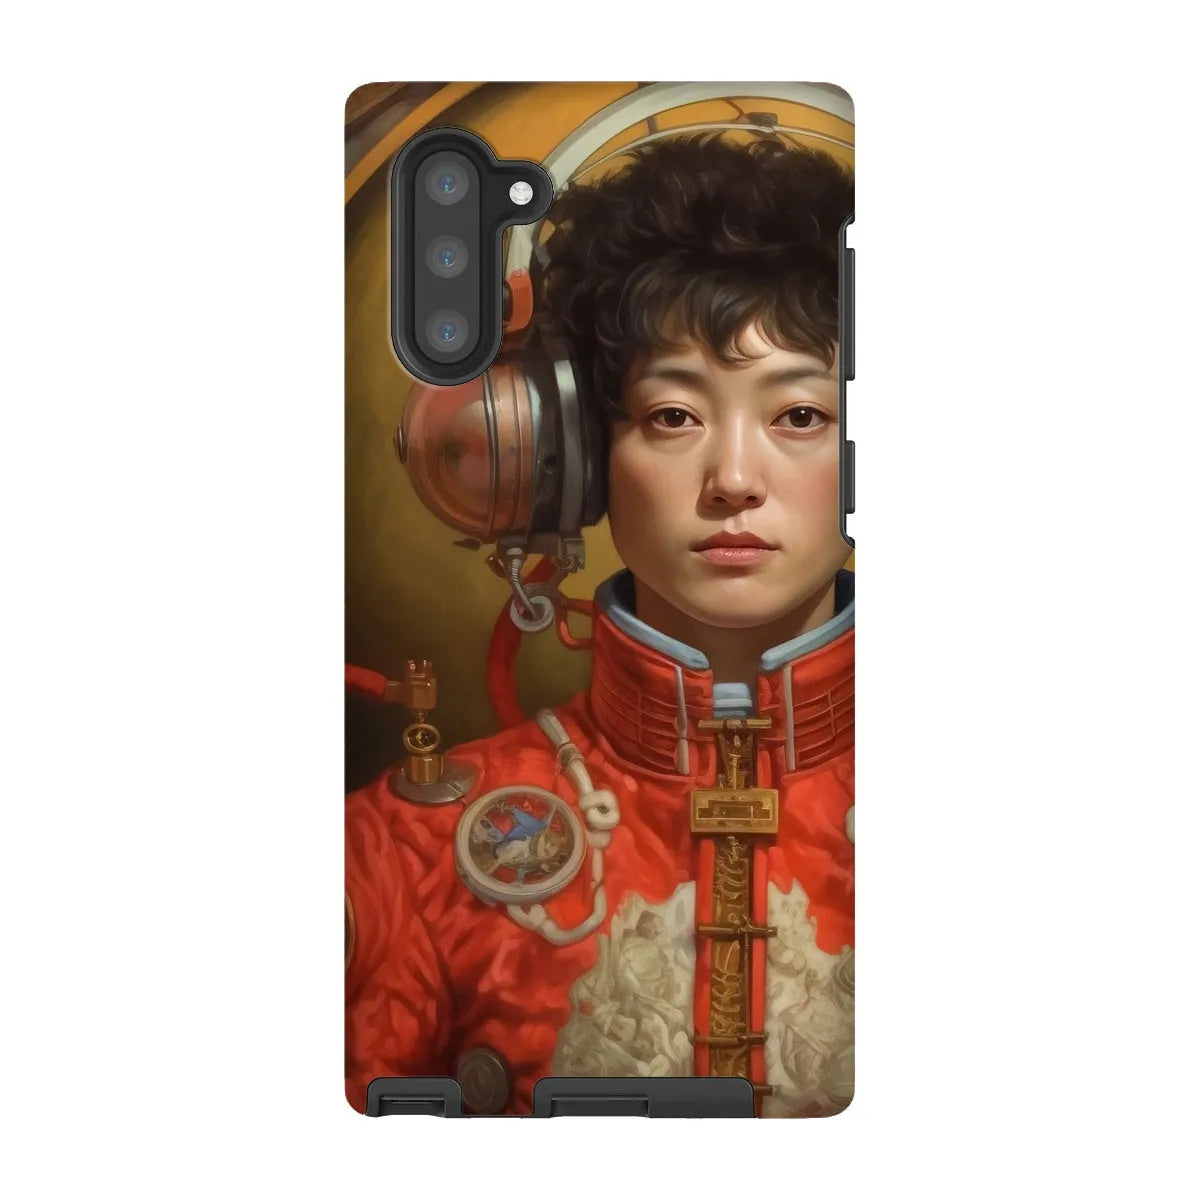 Mùchén - Gay Chinese Astronaut Aesthetic Phone Case - Samsung Galaxy Note 10 / Matte - Mobile Phone Cases - Aesthetic